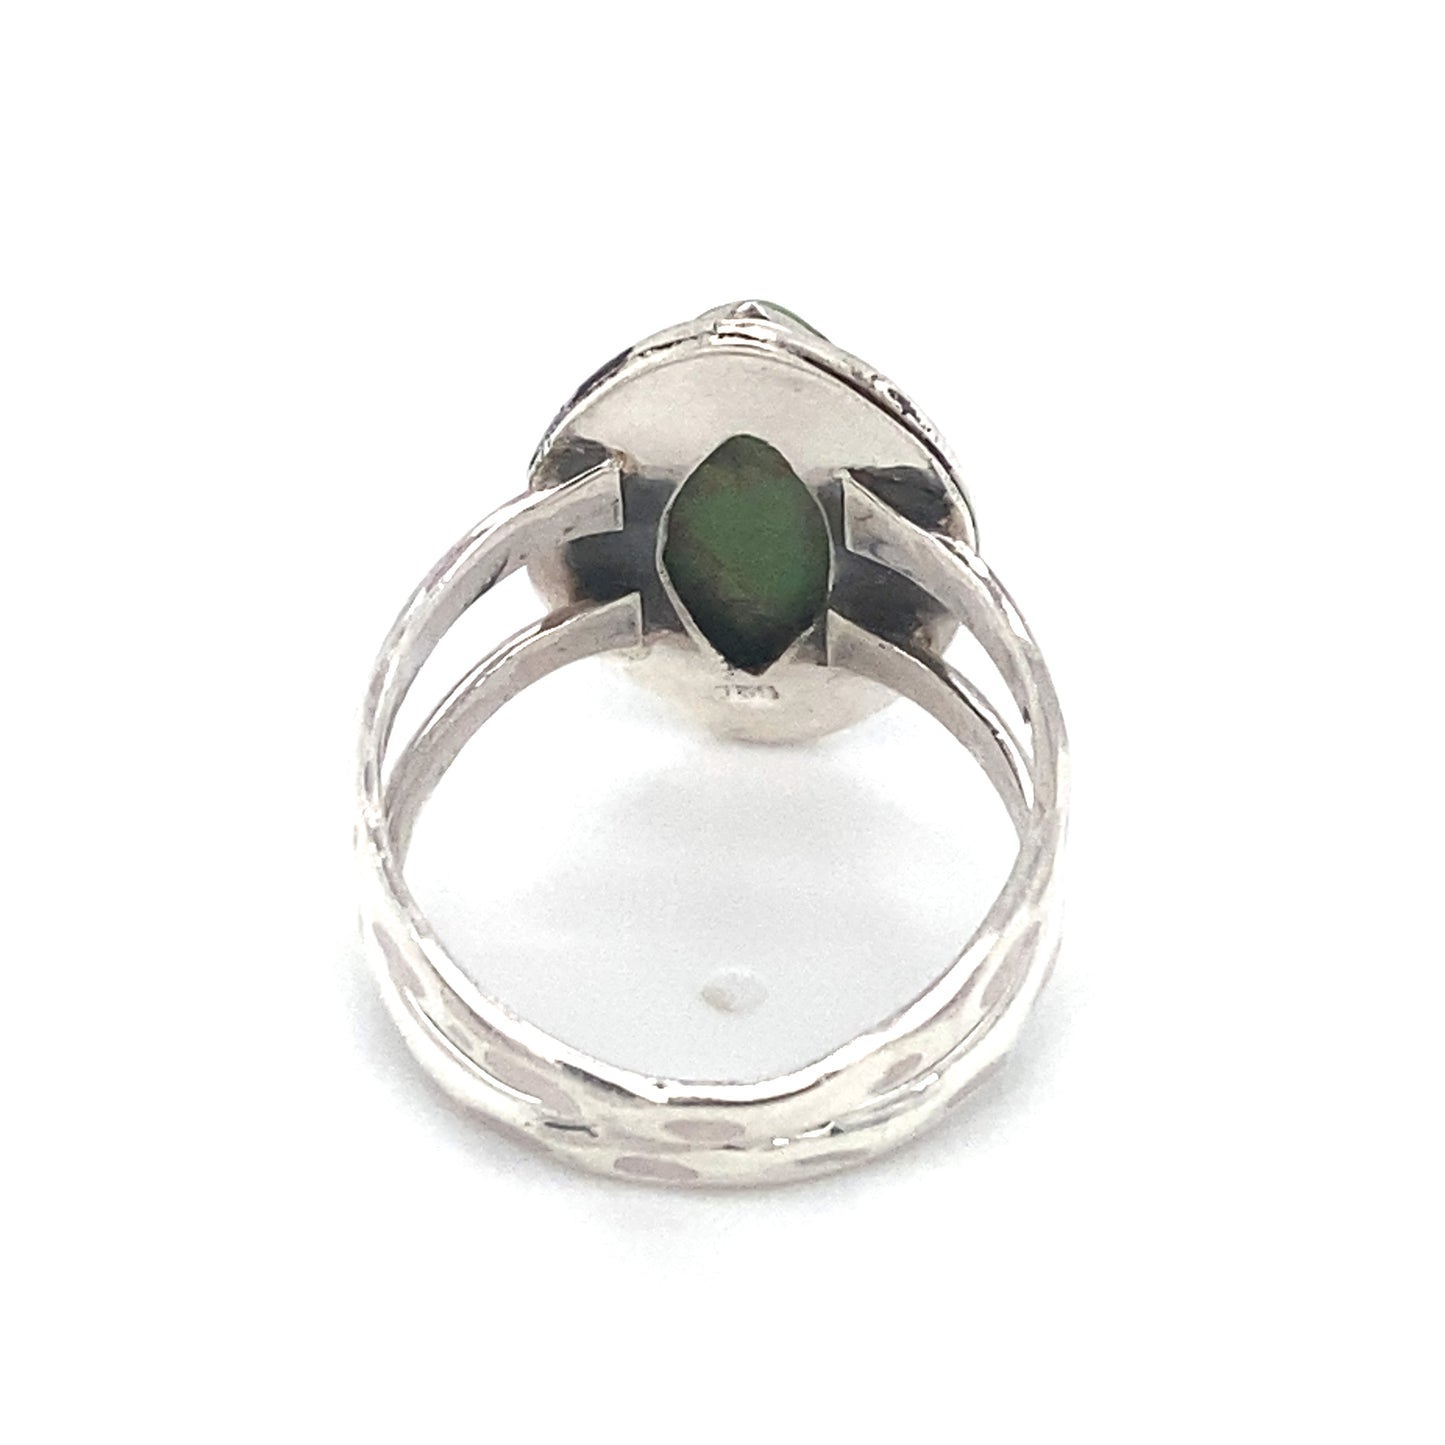 Circa 1990s Green Turquoise Cocktail Ring in Sterling Silver